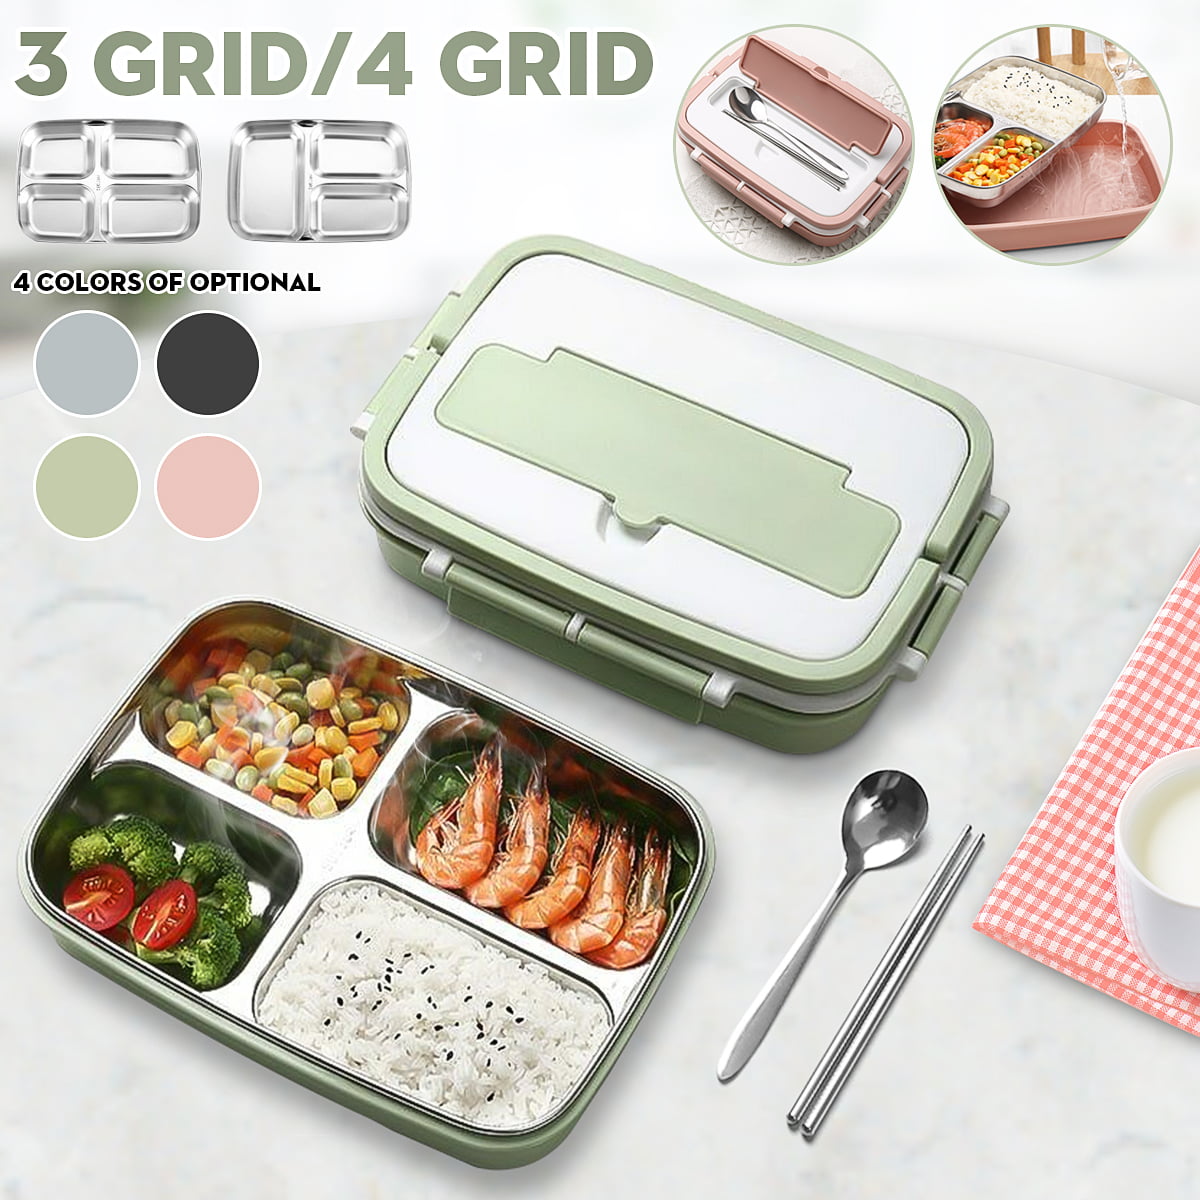 1*Stainless Steel Thermal Insulated Lunch Box Bento Food Container For Kid Adult 